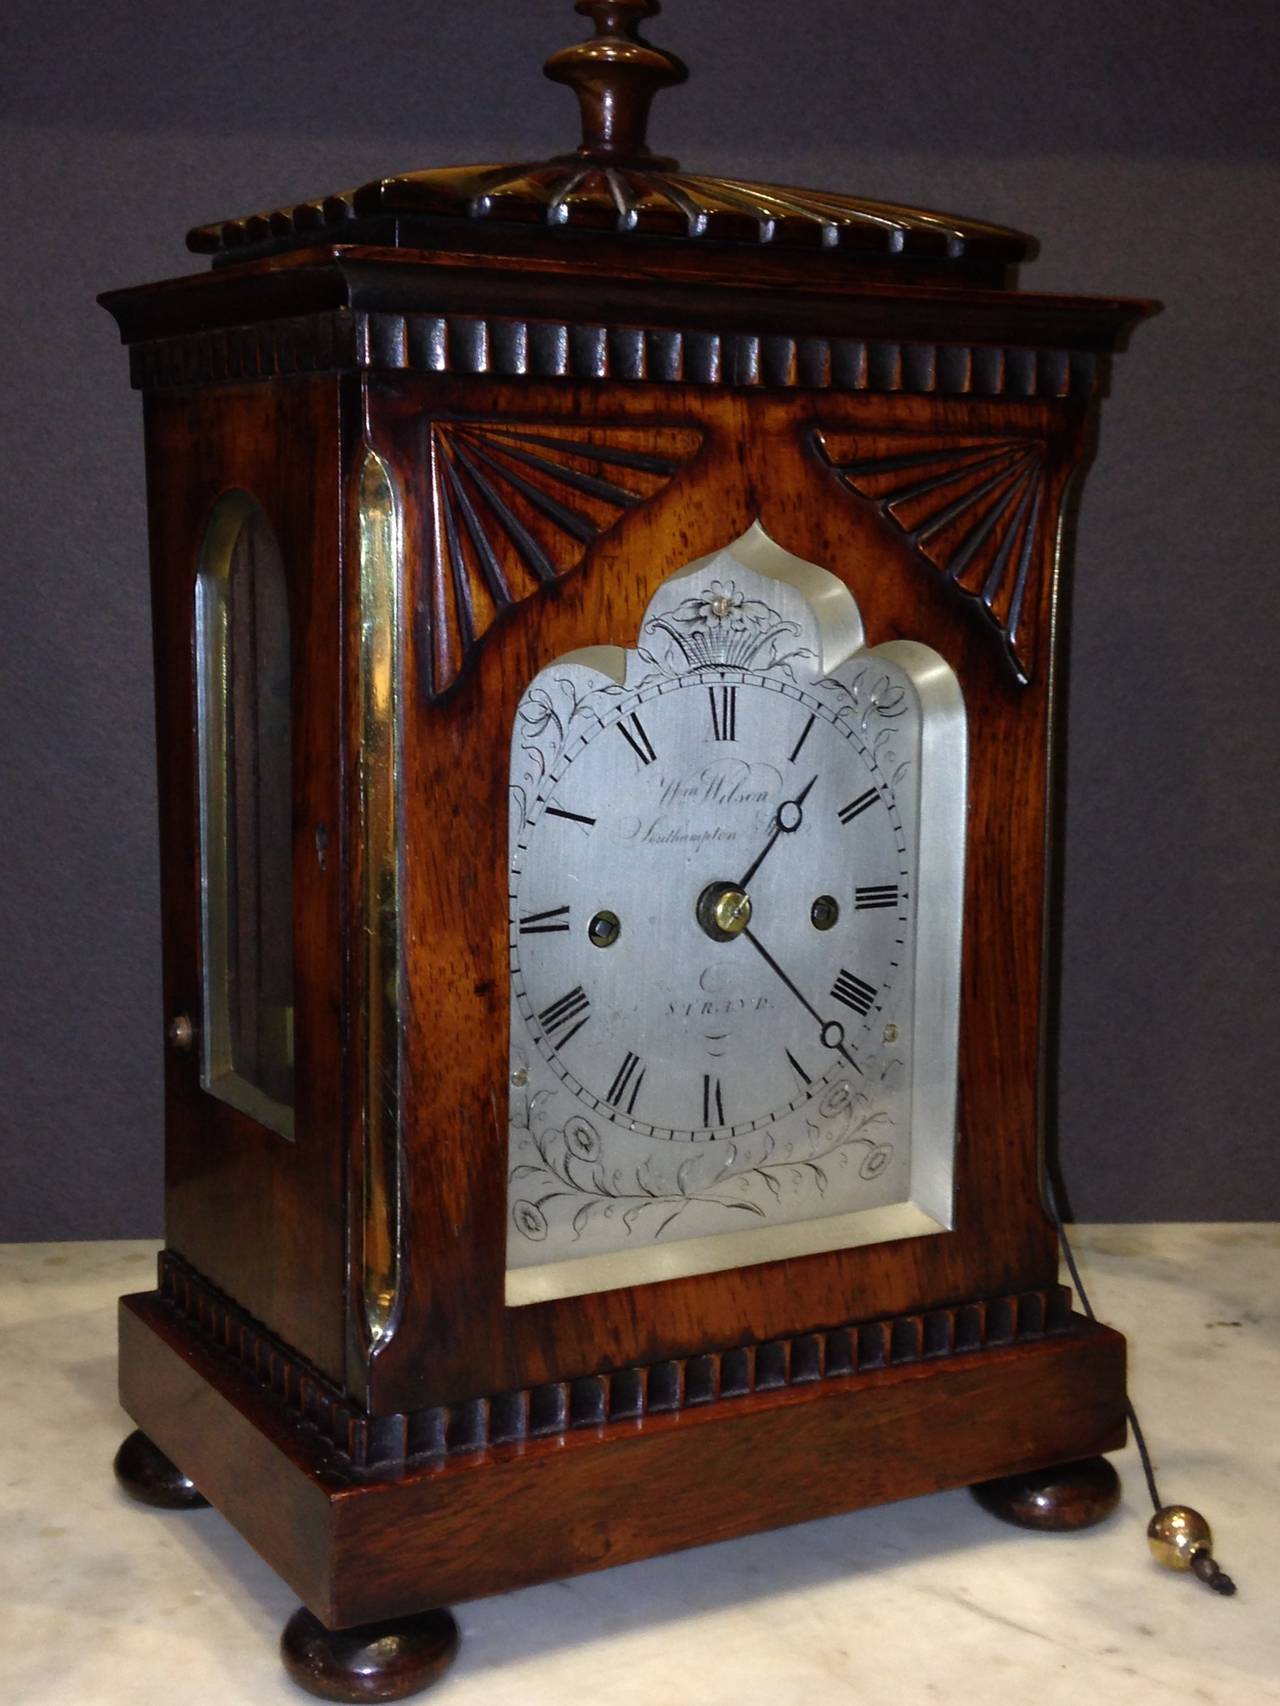 A very small attractive rosewood library table clock by William Wilson Southampton Street. Strand London from 1839 -44. The case has a gadrooned top with a turned finial, canted side angles with brass inlay, and a base with a decorative moulding